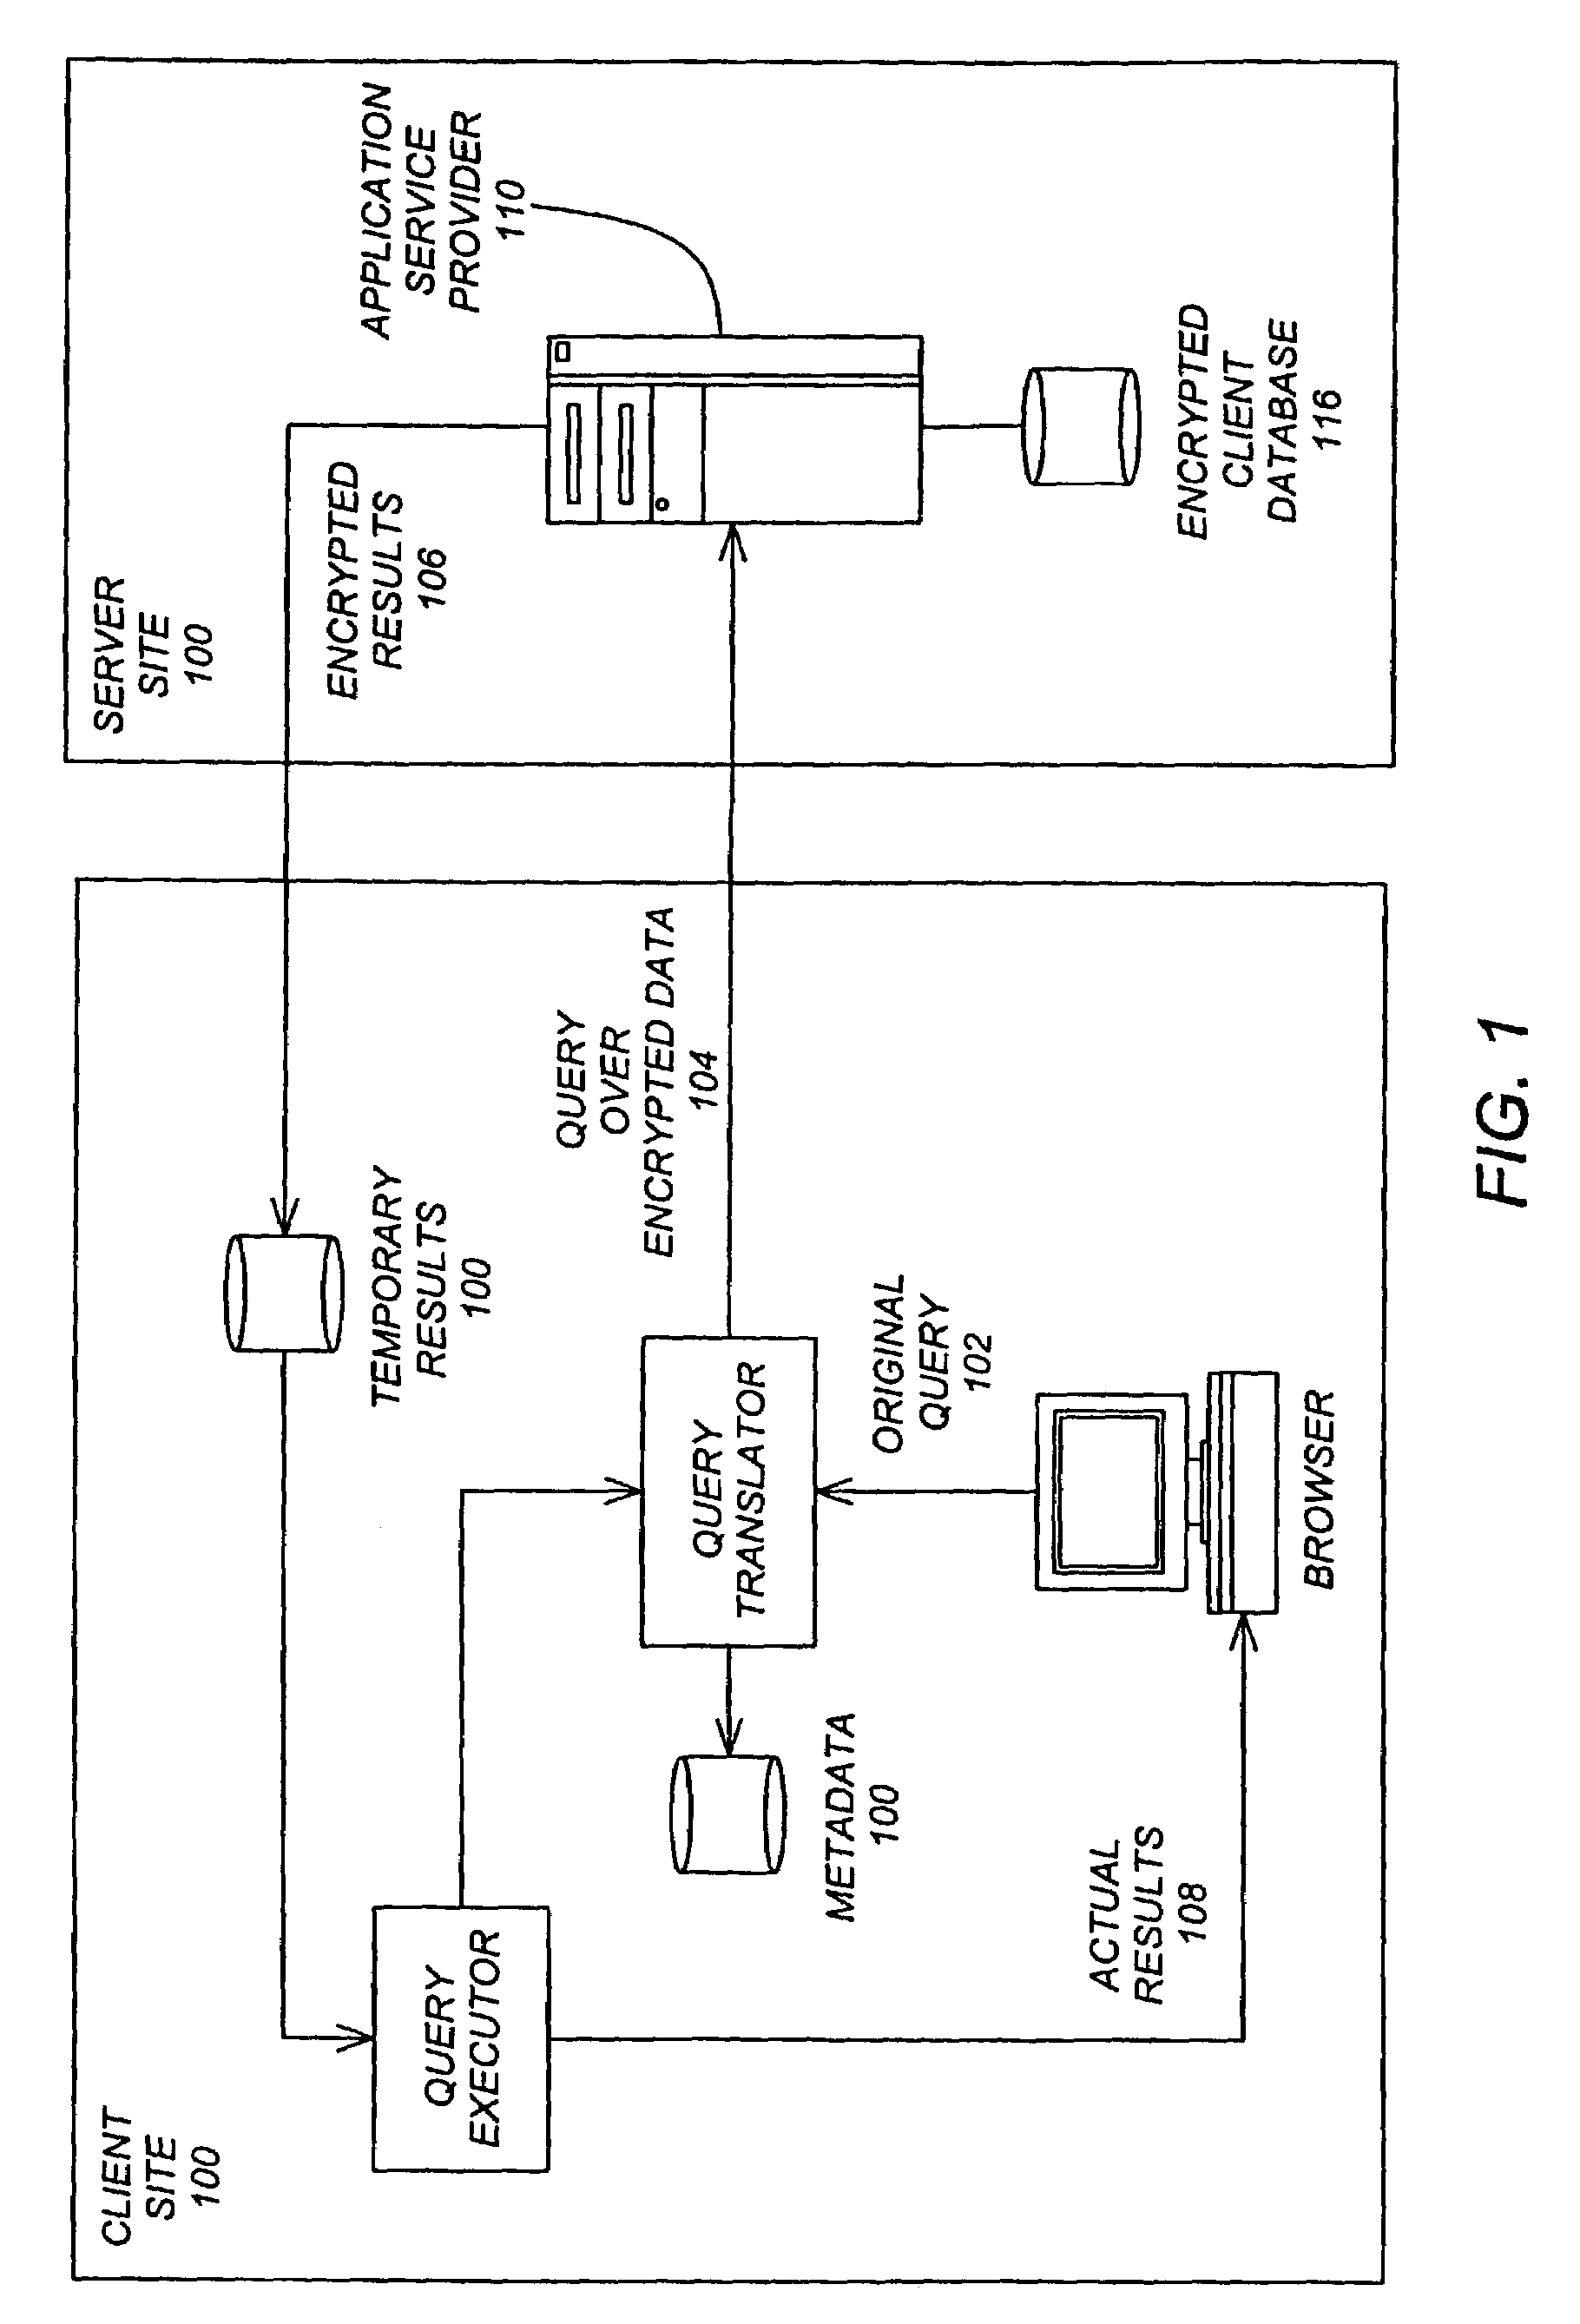 Querying encrypted data in a relational database system